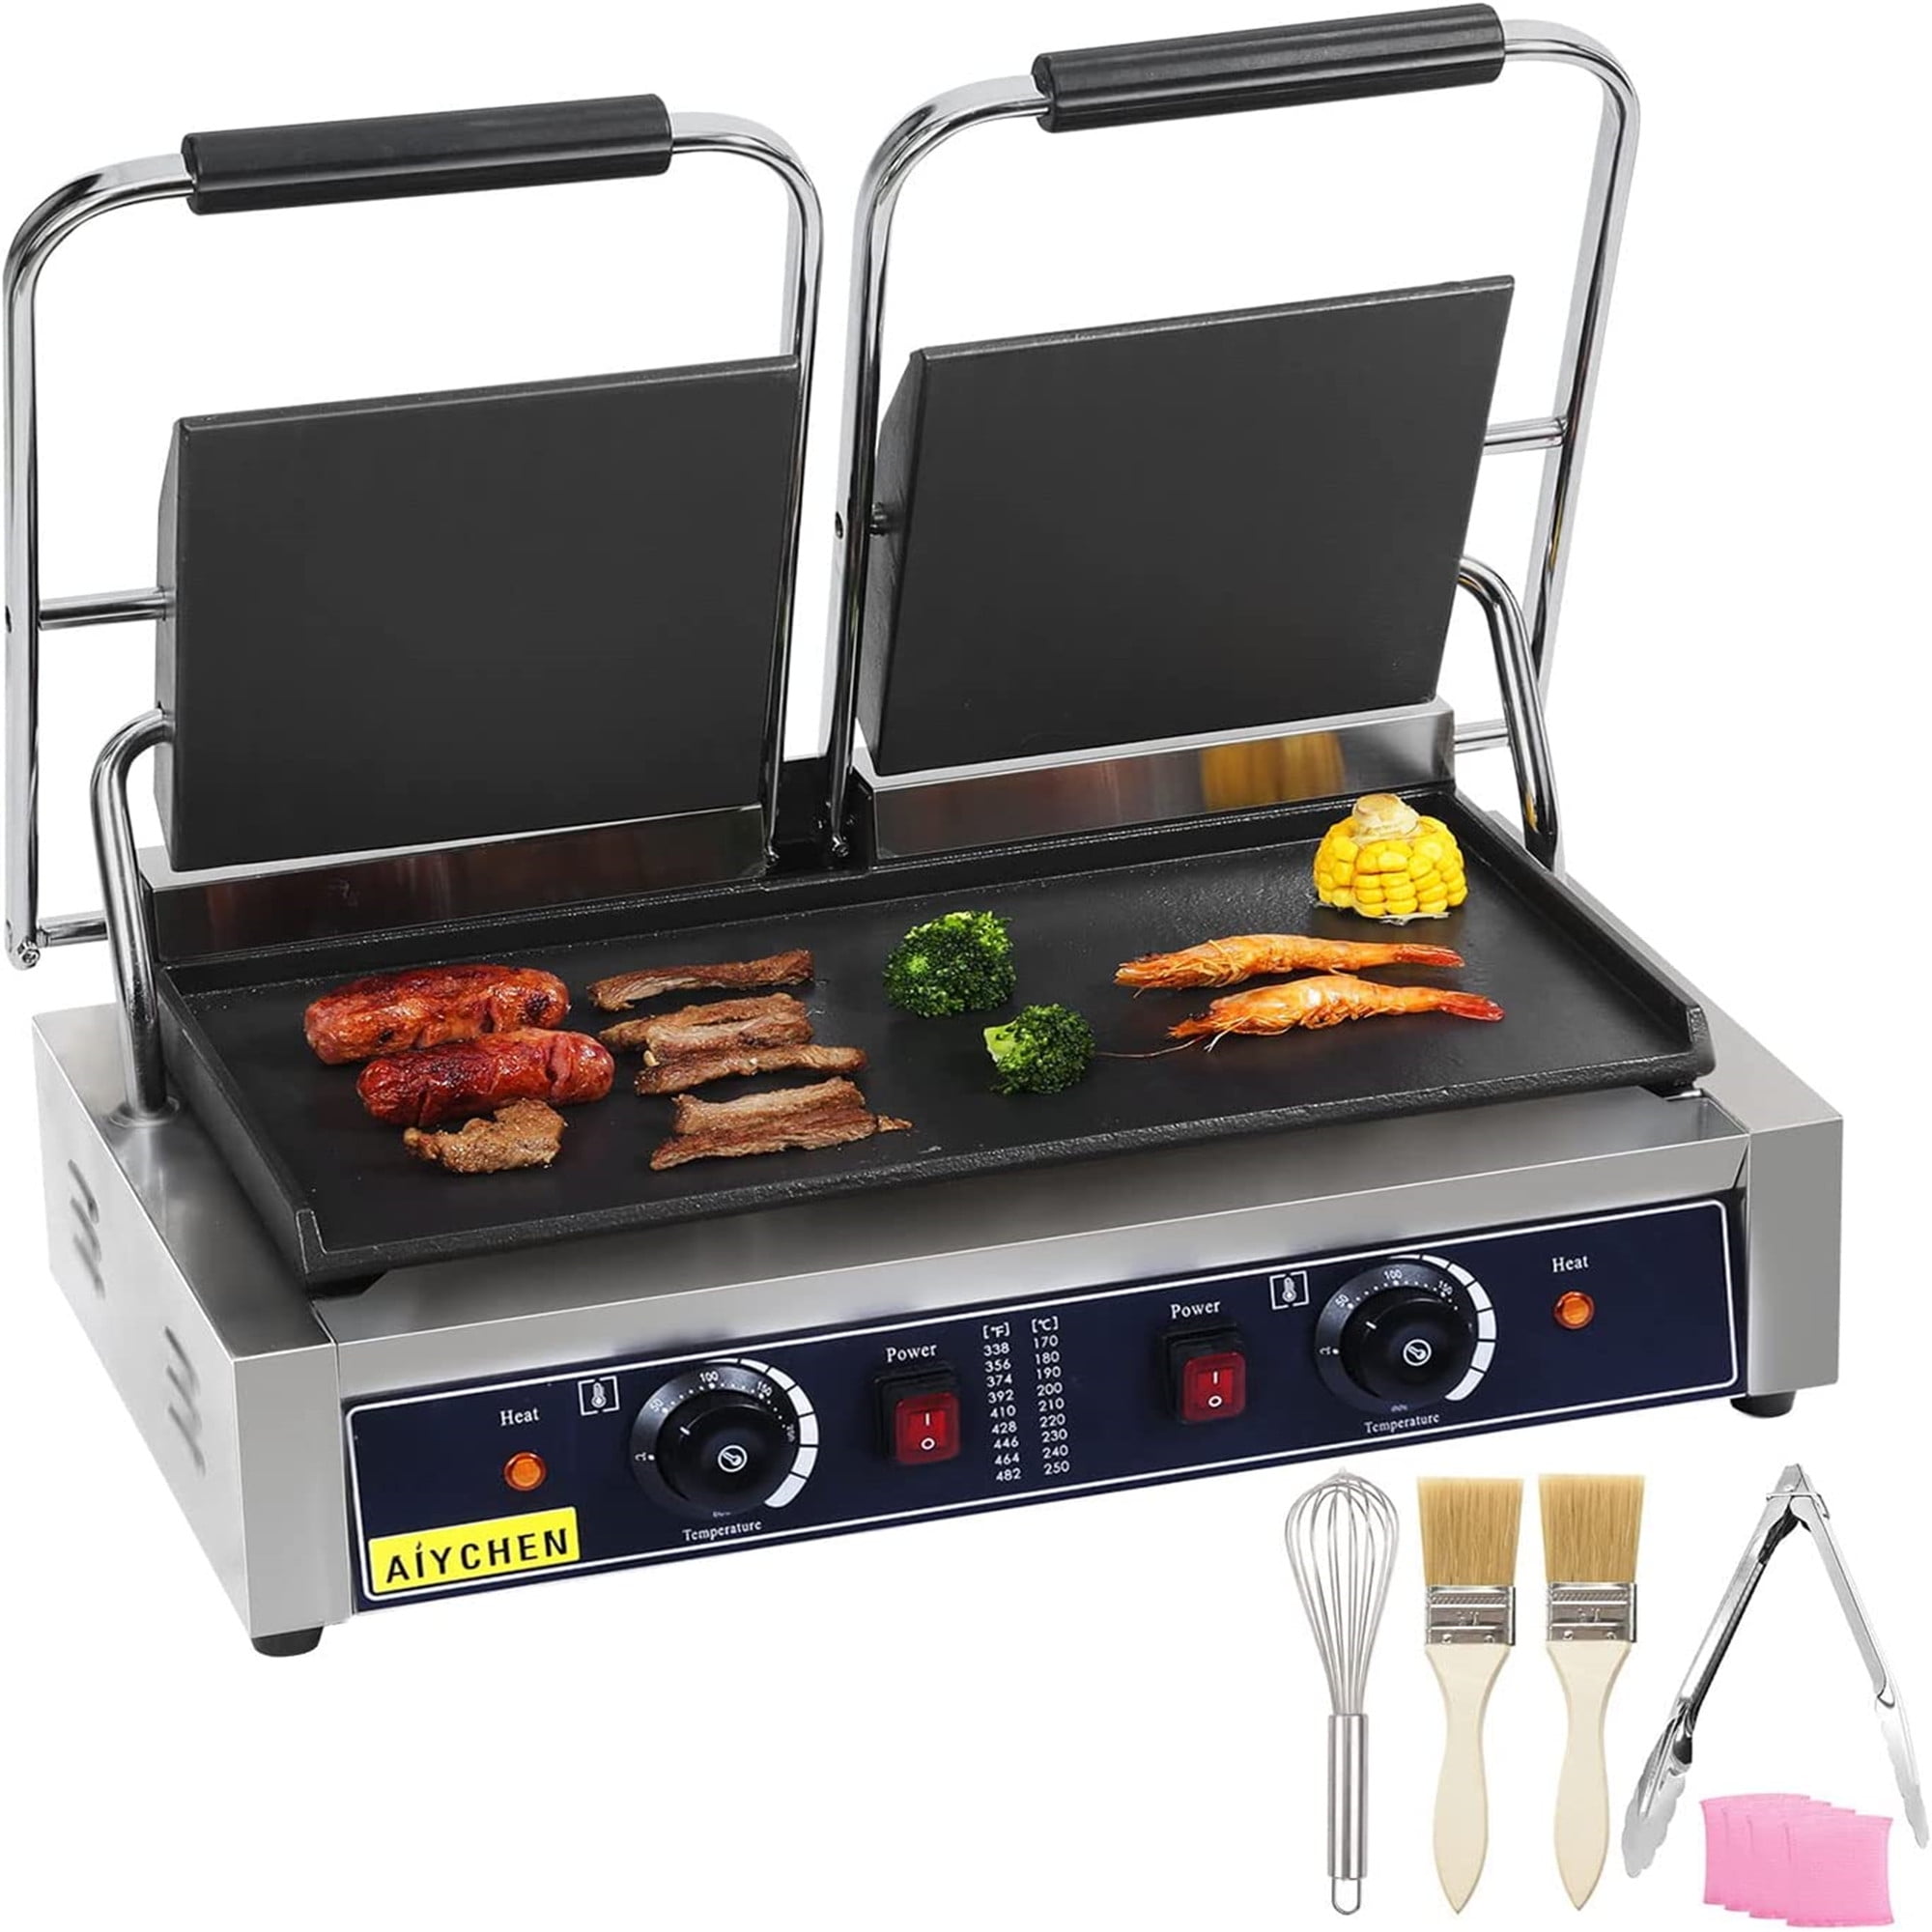 Grilled Press Commercial Sandwich Panini Press 2X1800W Temperature Control for Hamburgers Steaks Bacons 